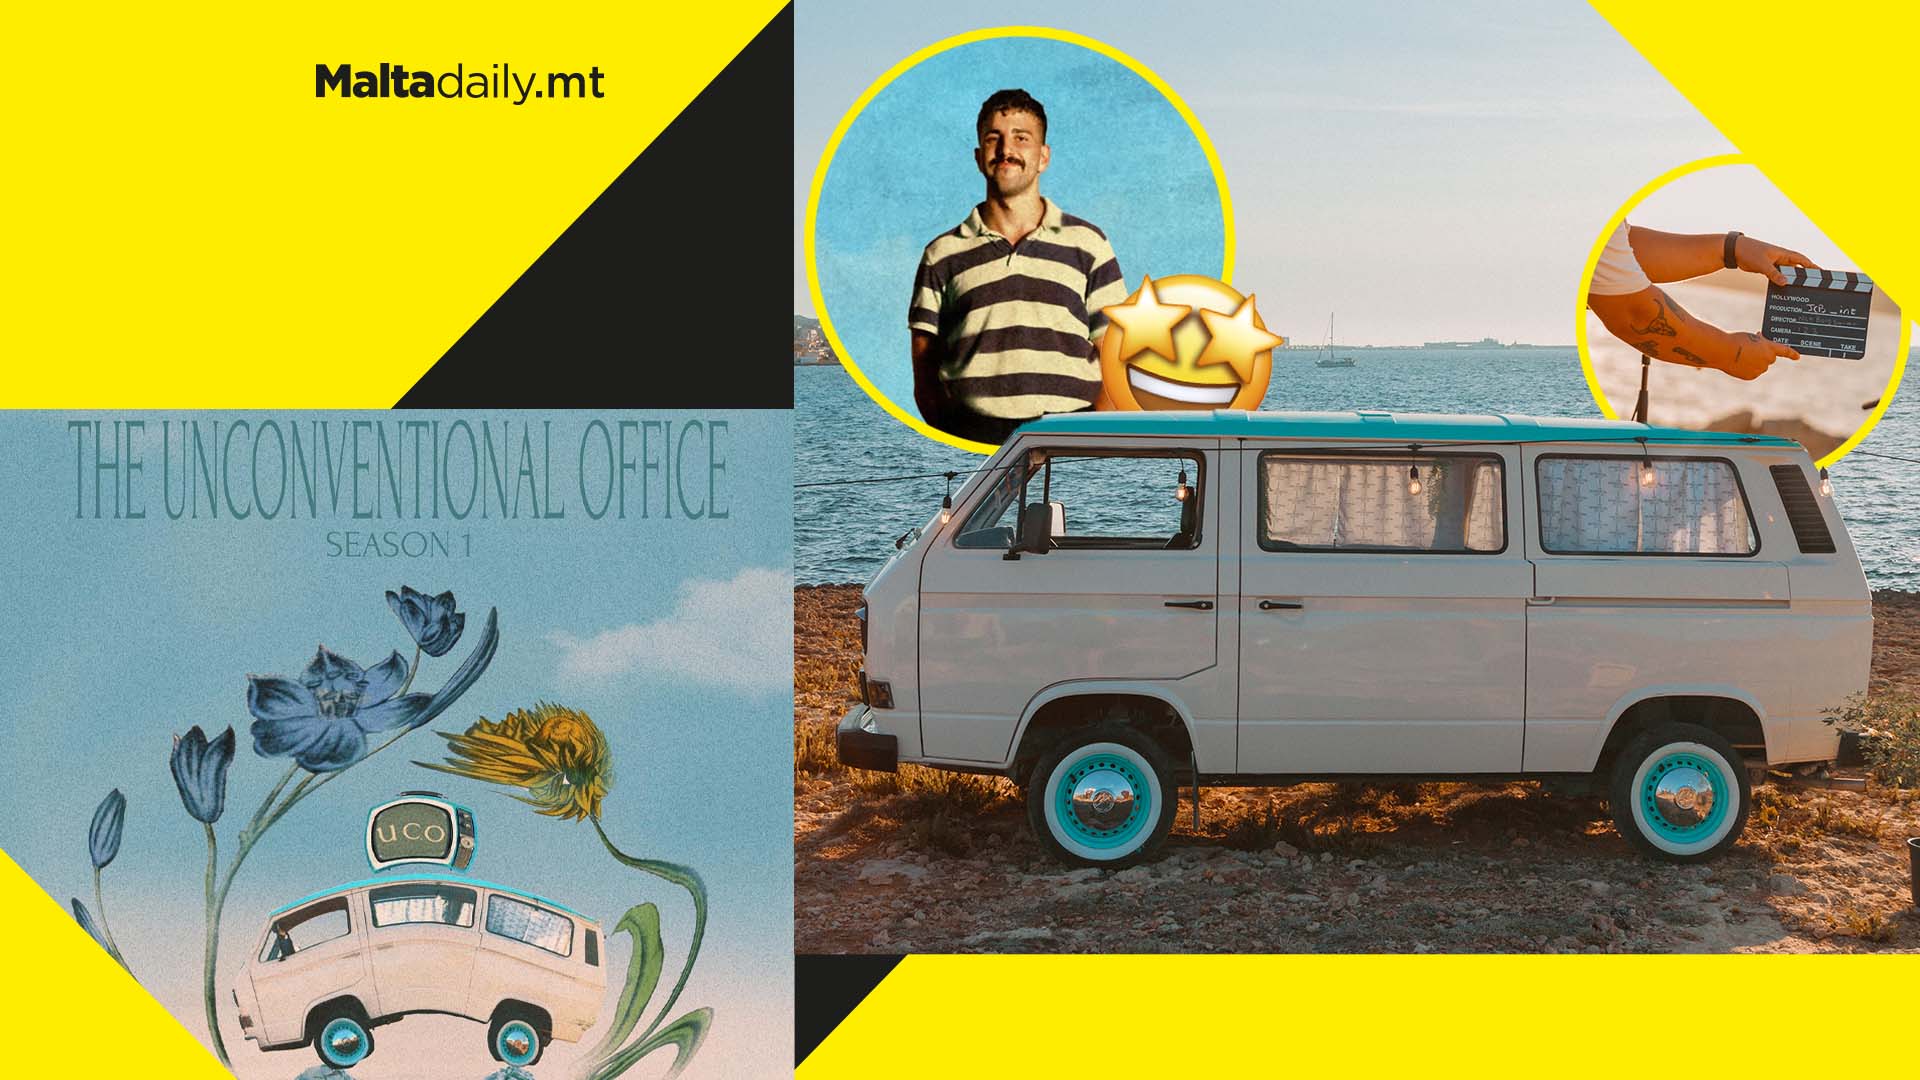 FIRST LOOK: Fresh new platform aims to showcase local music in gorgeous Maltese locations